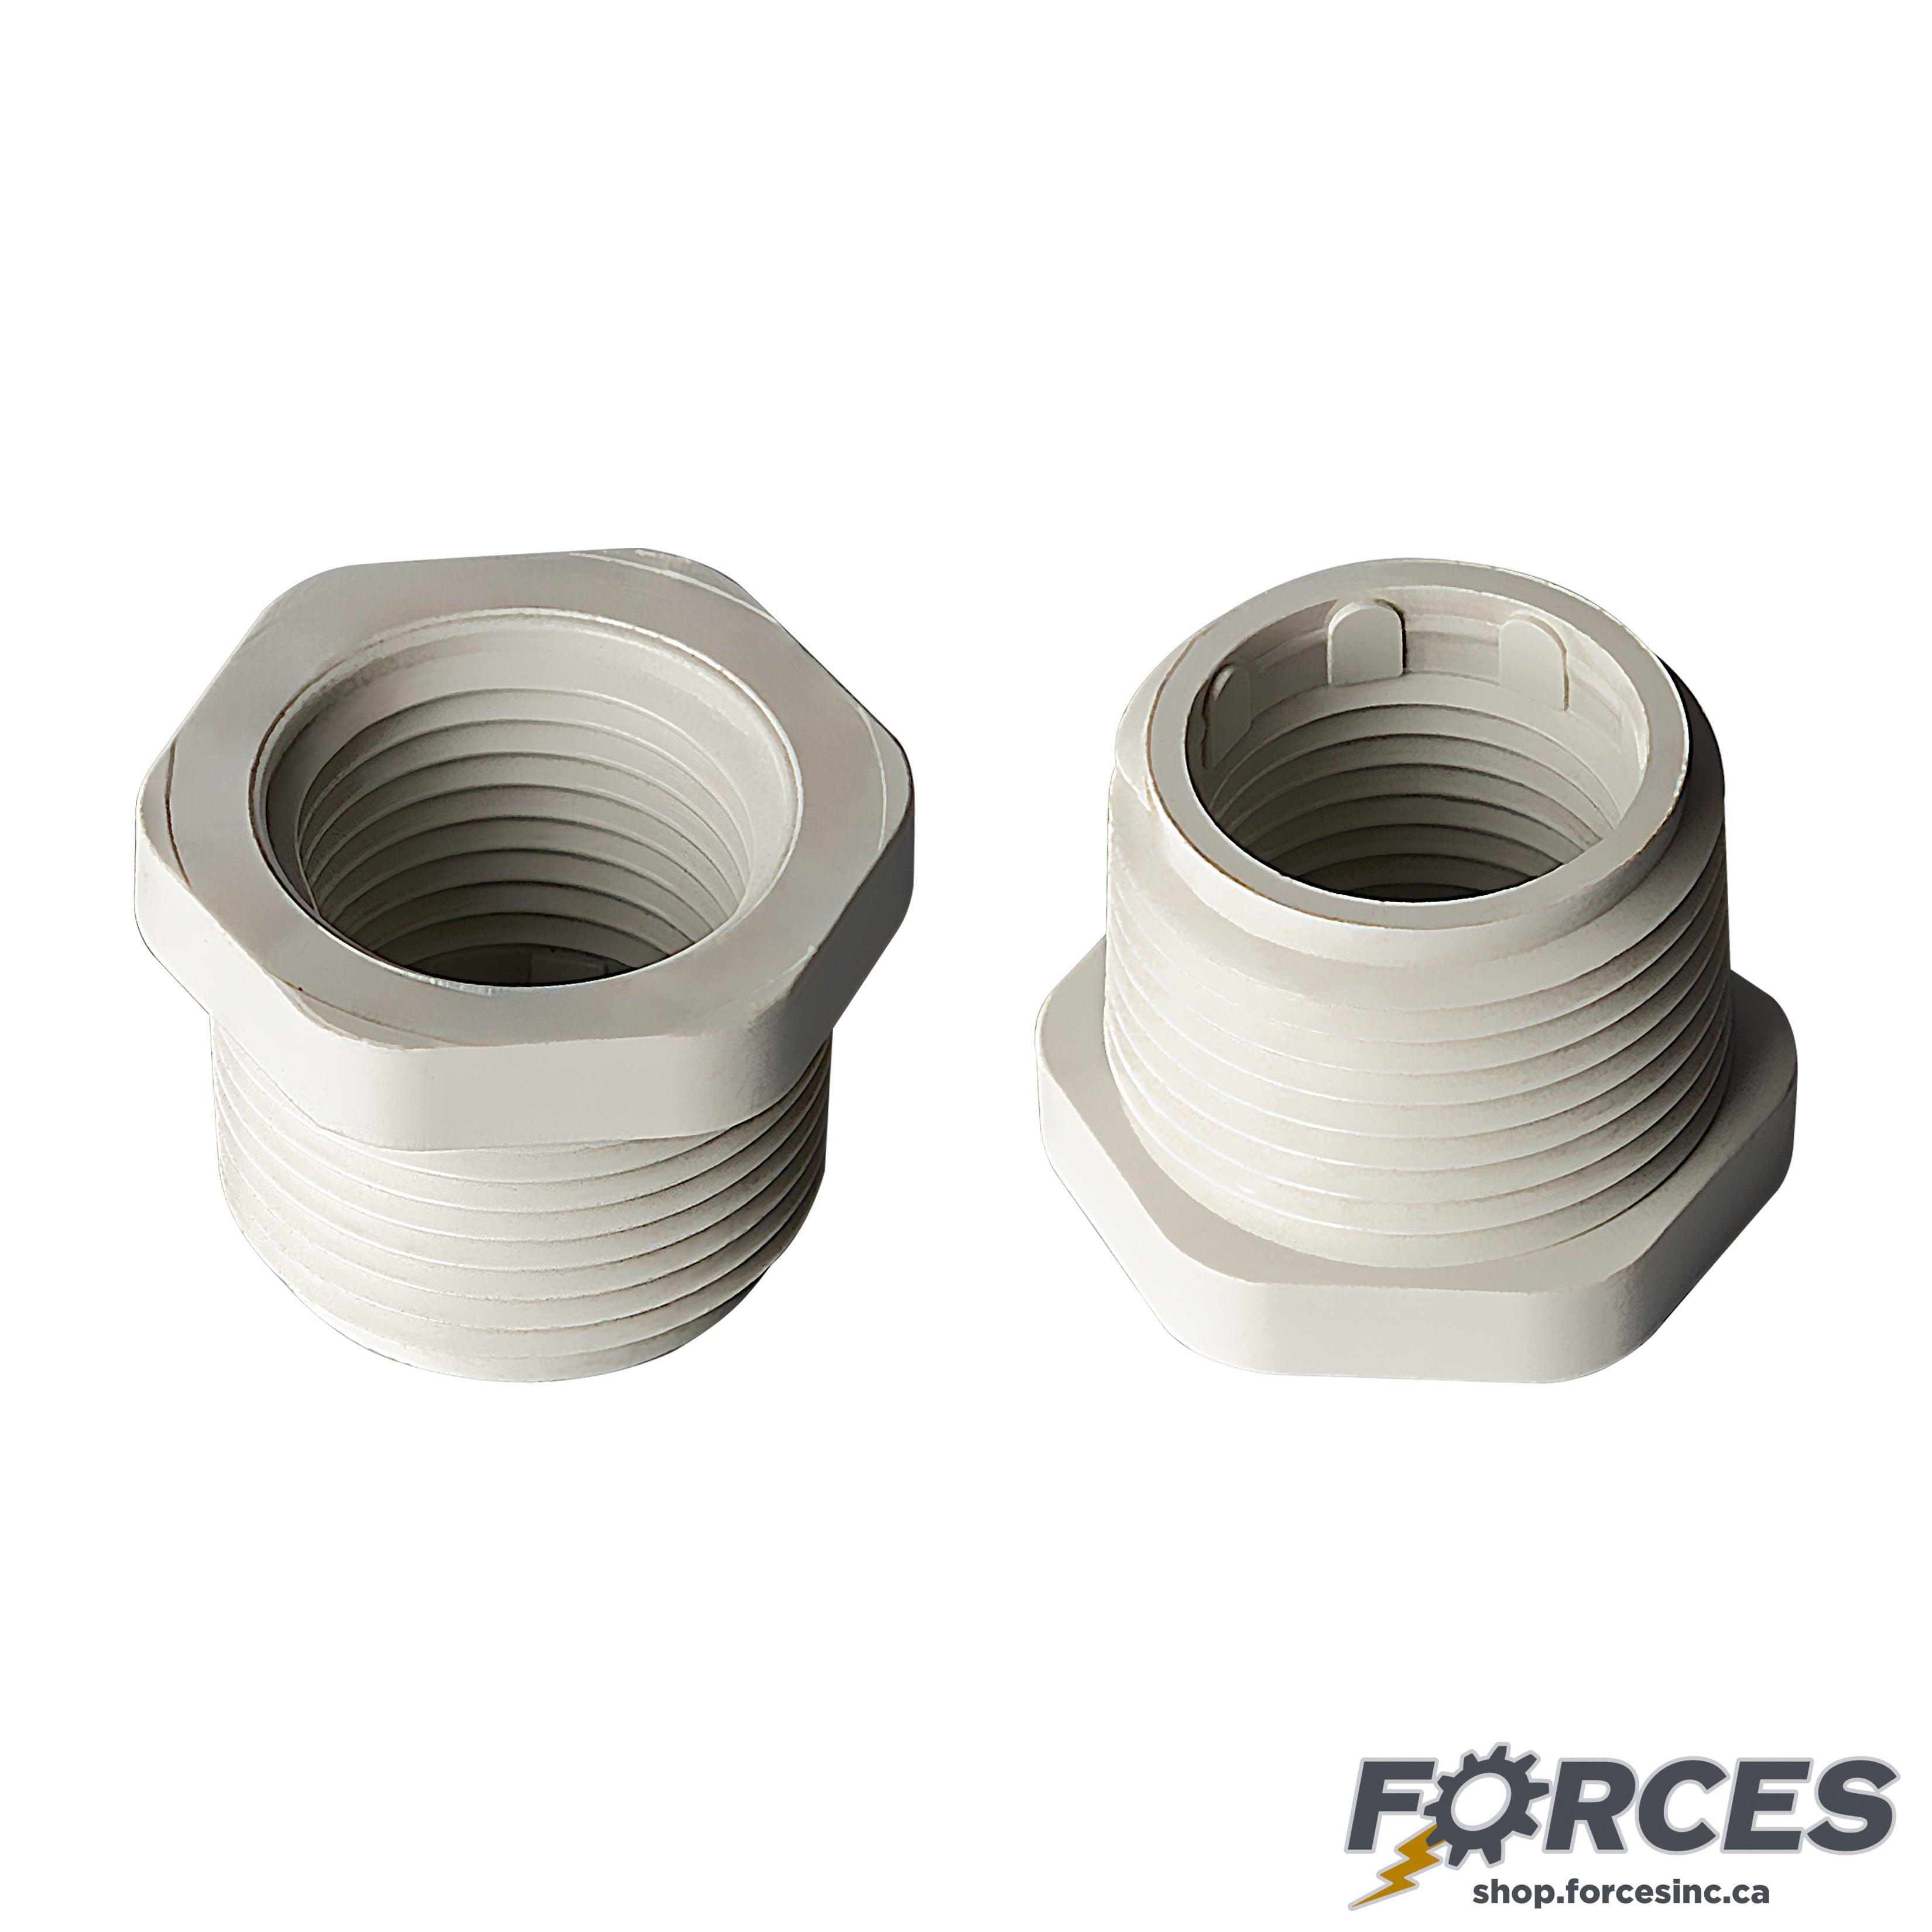 1-1/2" x 3/4" Reducer Bushing (MPT x FPT) Sch 40 - PVC white | 439210W - Forces Inc